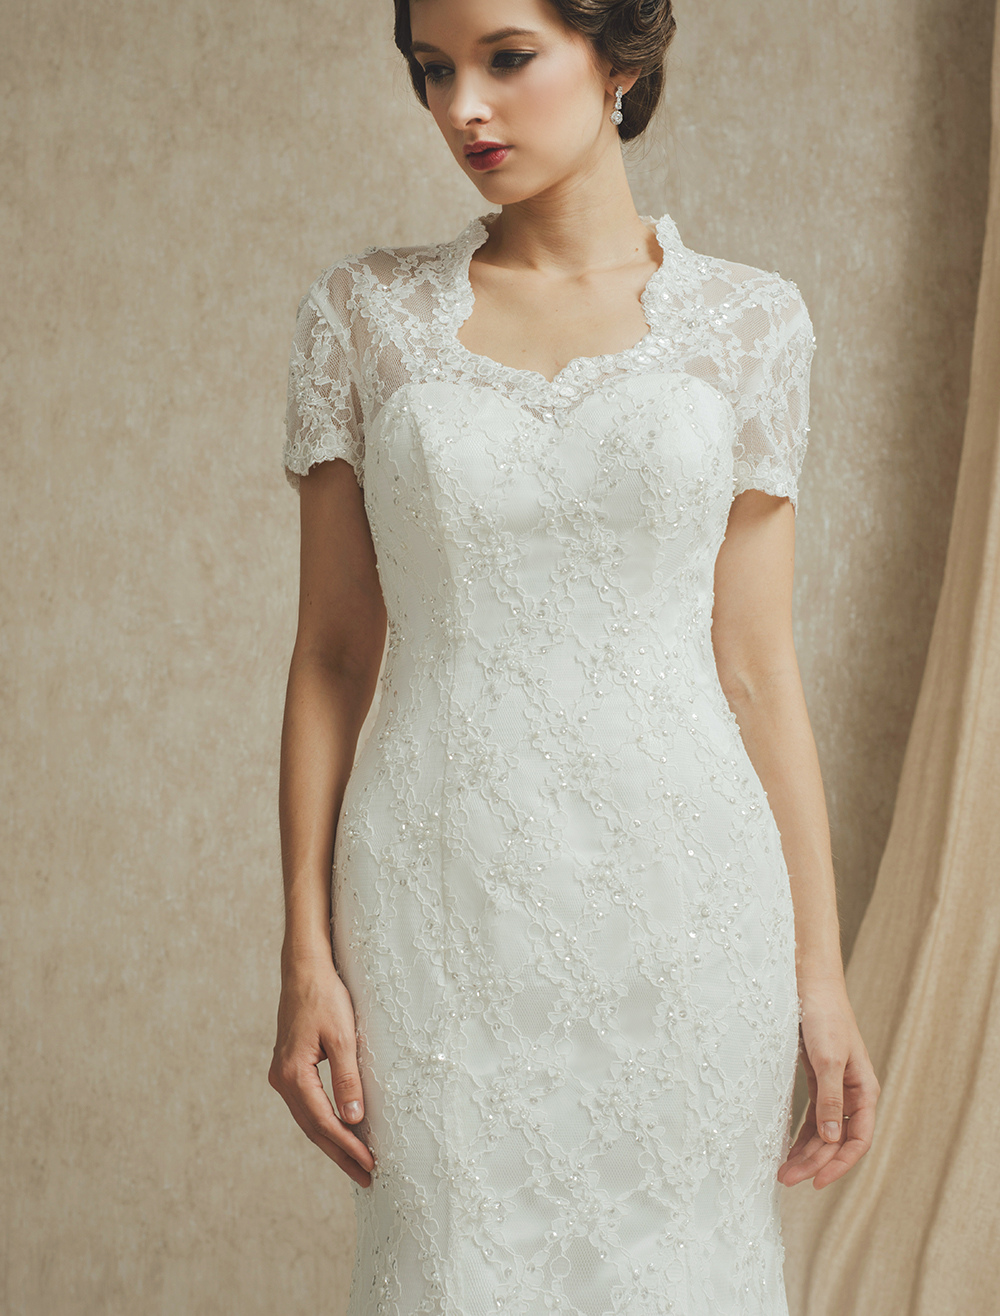 Removable Sweep Wedding Gown with Sequined Lace - Milanoo.com